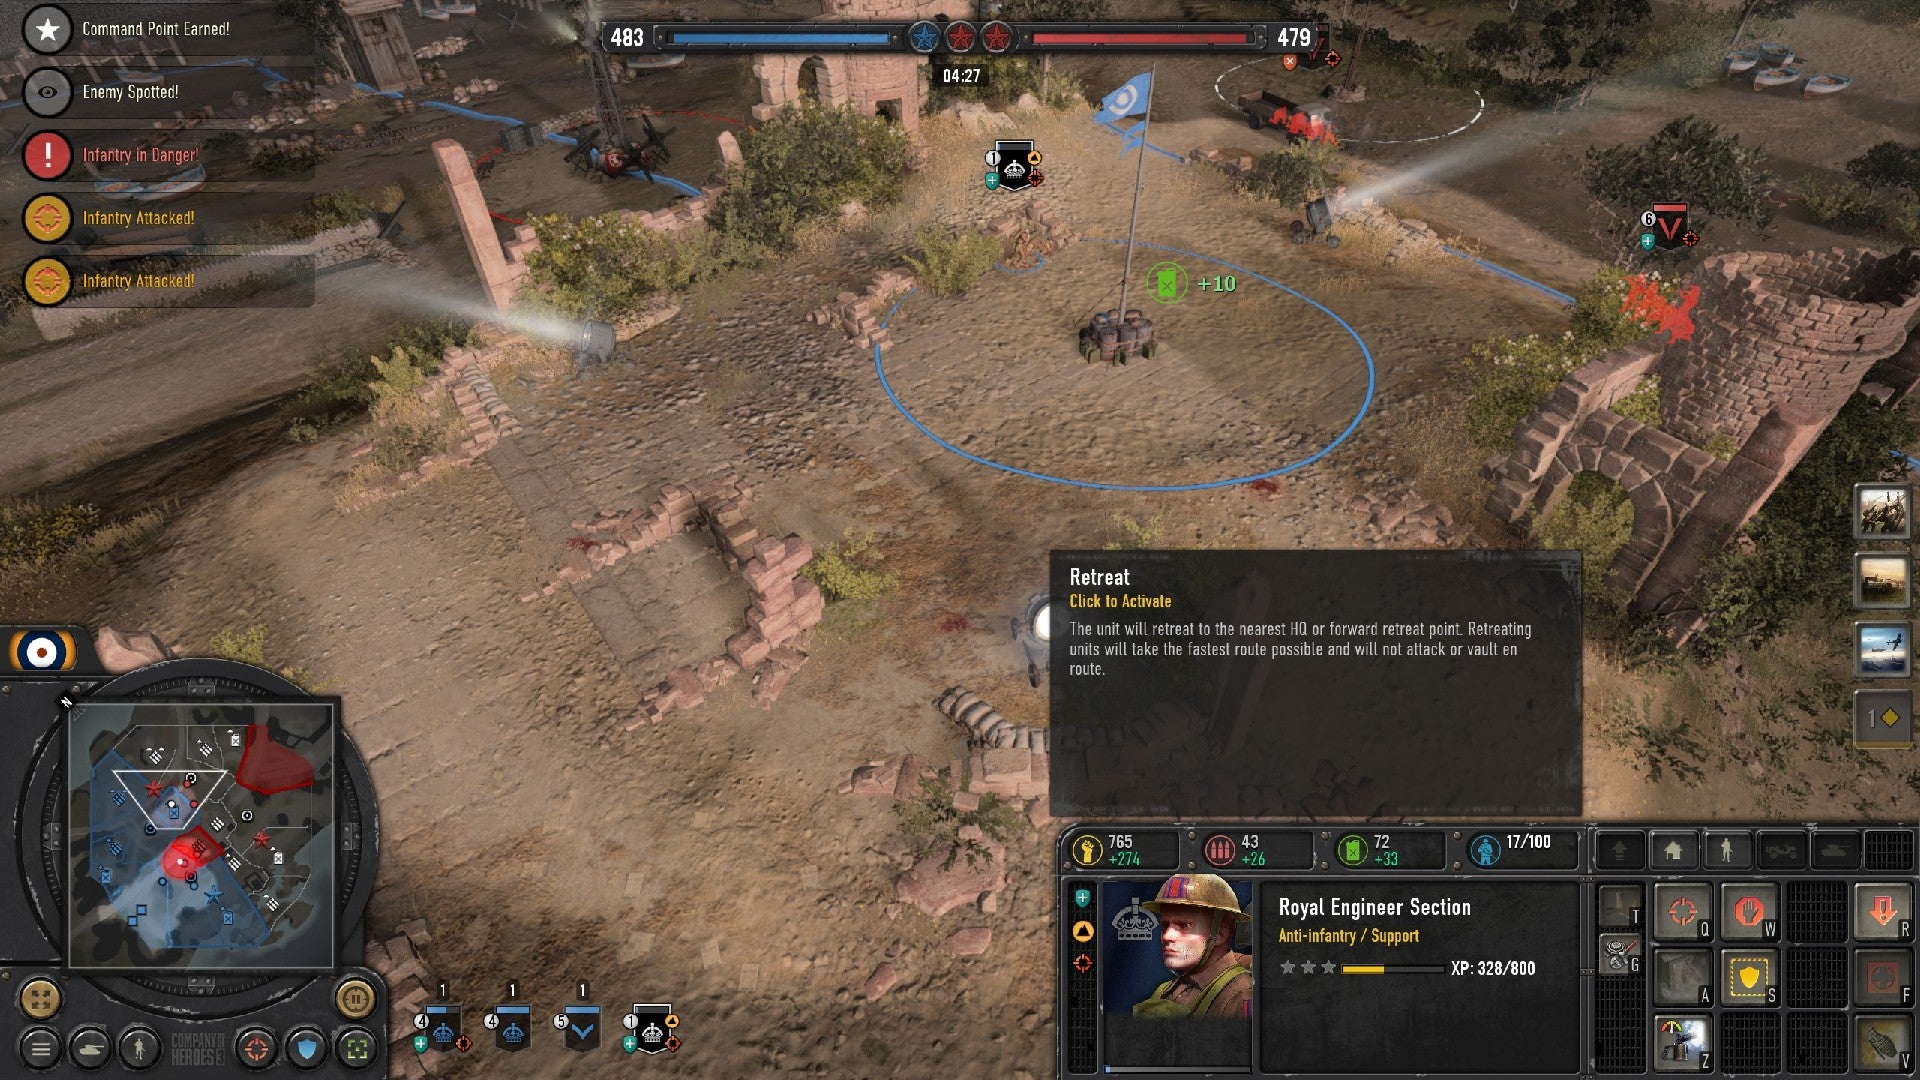 Company of Heroes 3 image showing an Engineer unit that's nearly dead, with the retreat tooltip in the bottom-right.